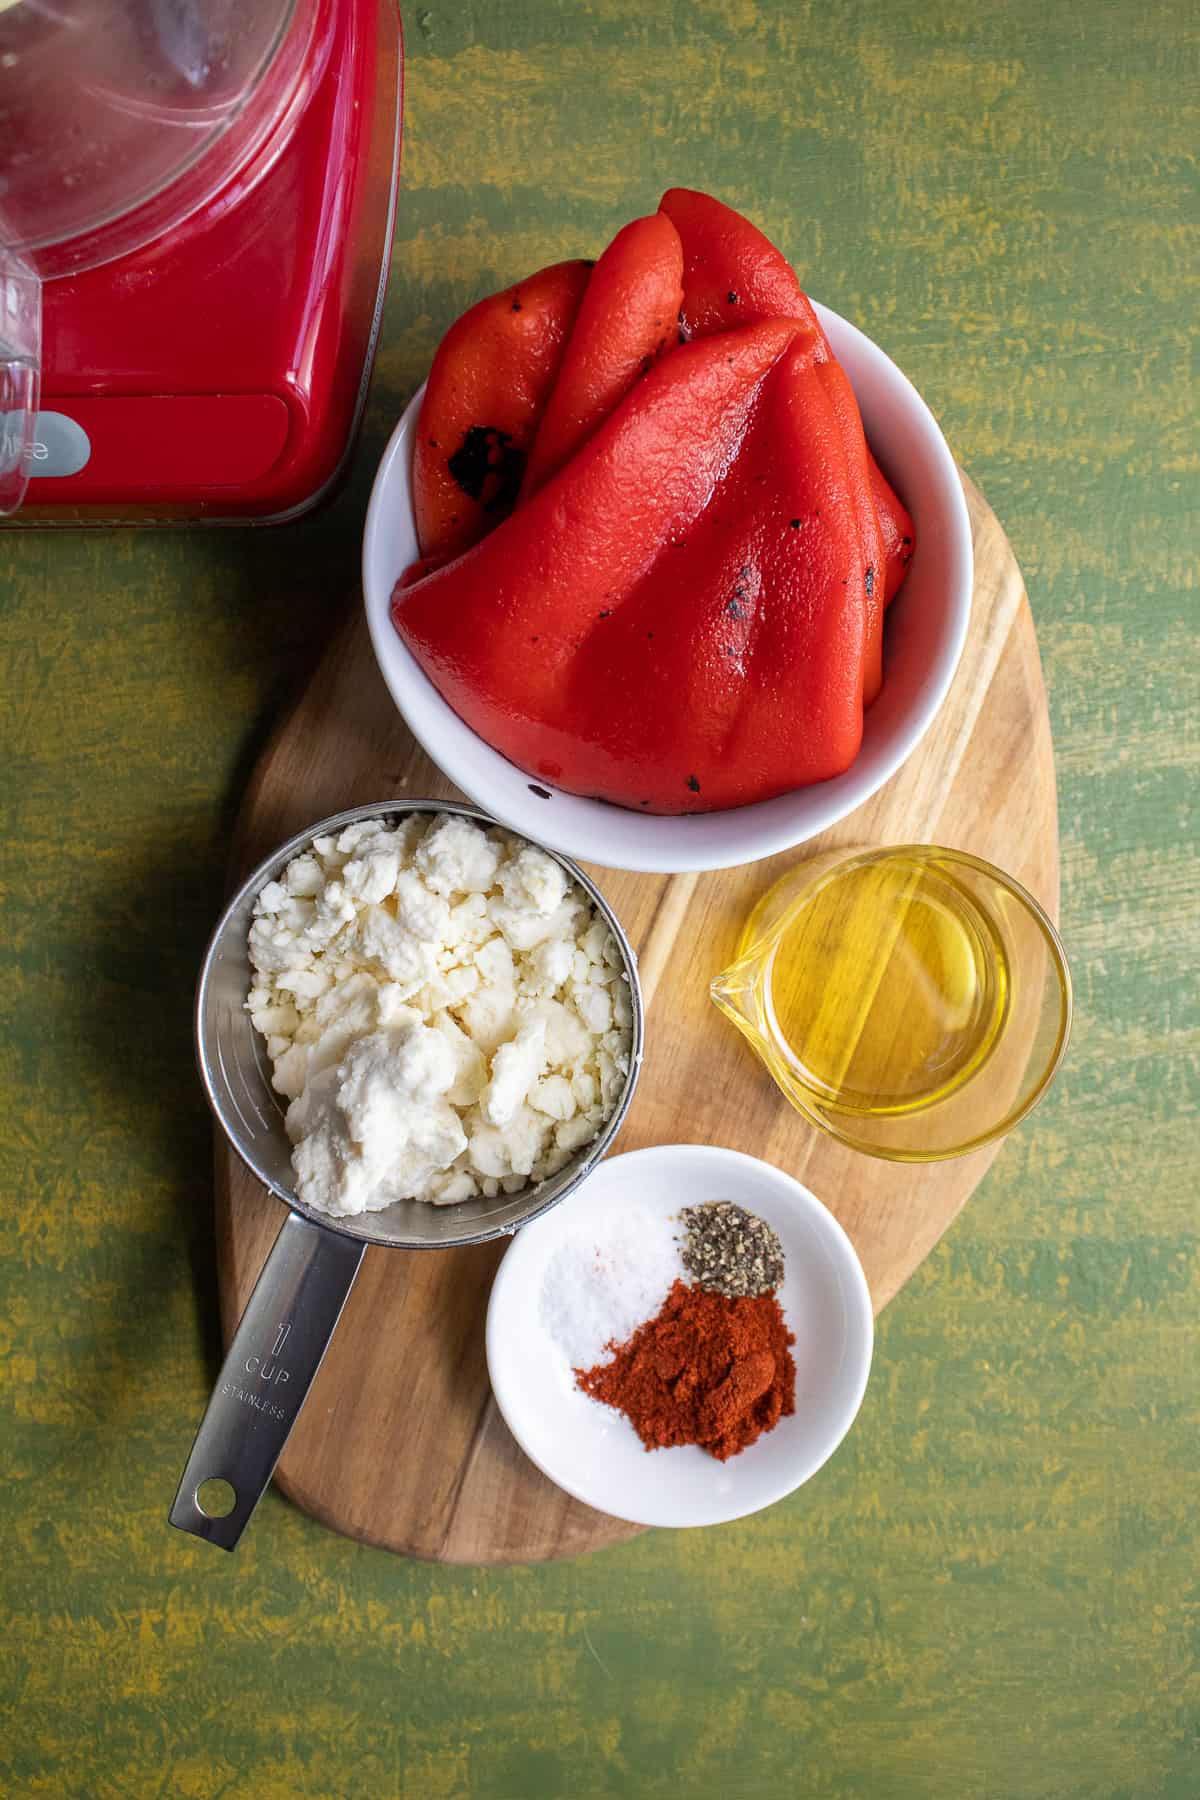 The ingredients for the roasted red pepper sauce (including feta, olive oil, smoked pepper, salt, and pepper) arranged on a small wooden cutting board.